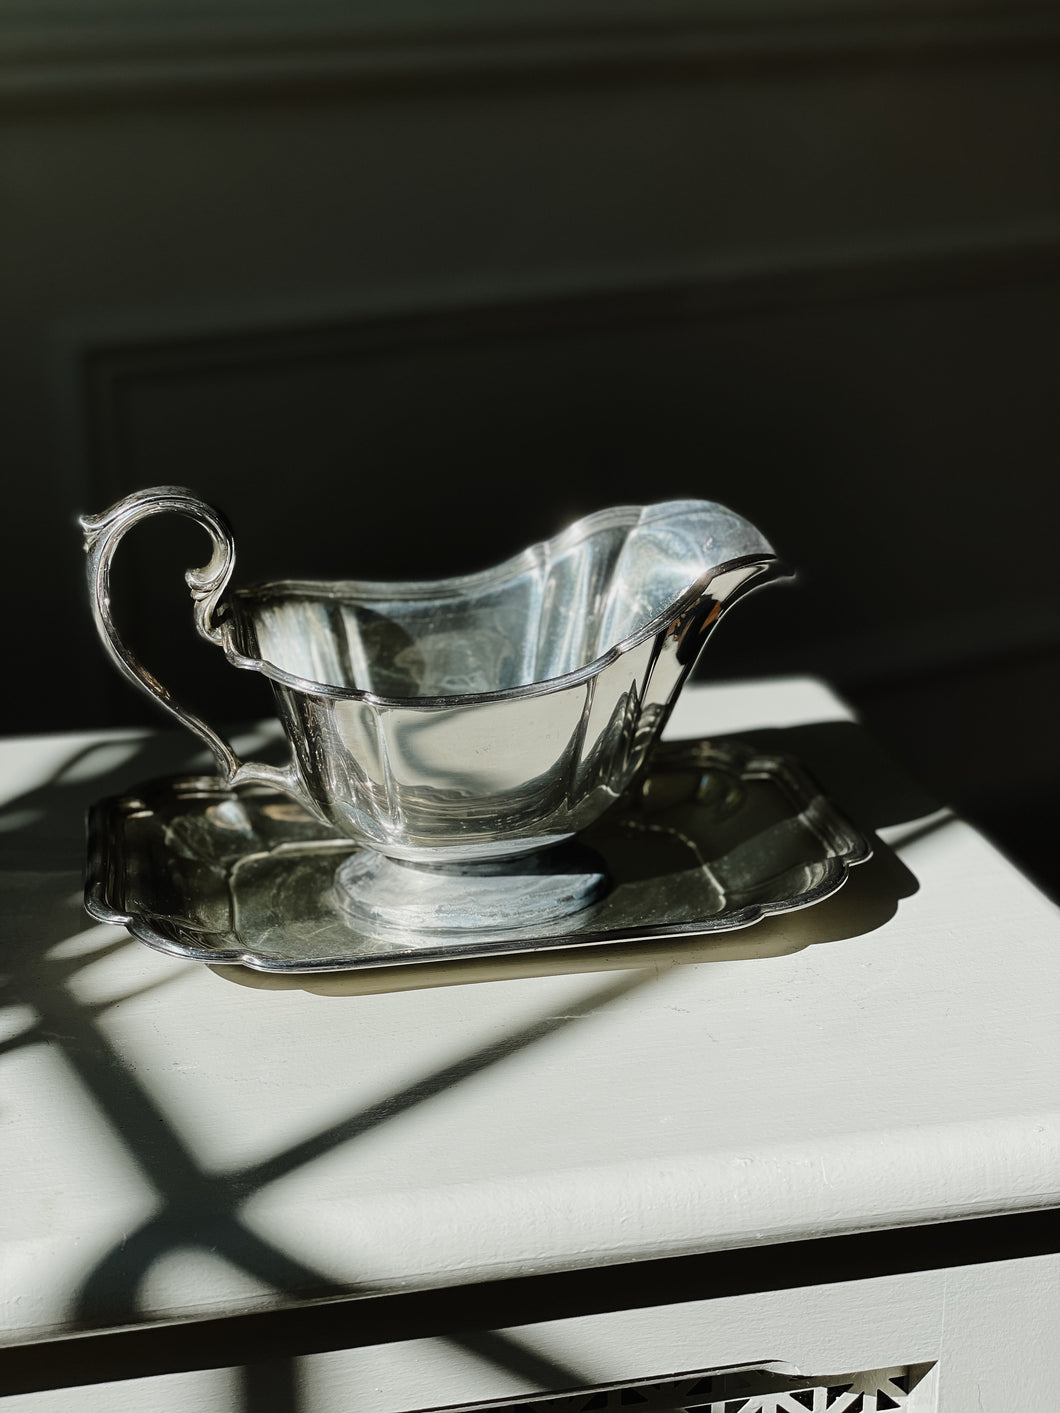 Vintage Silverplate Gravy Boat with Attached Tray